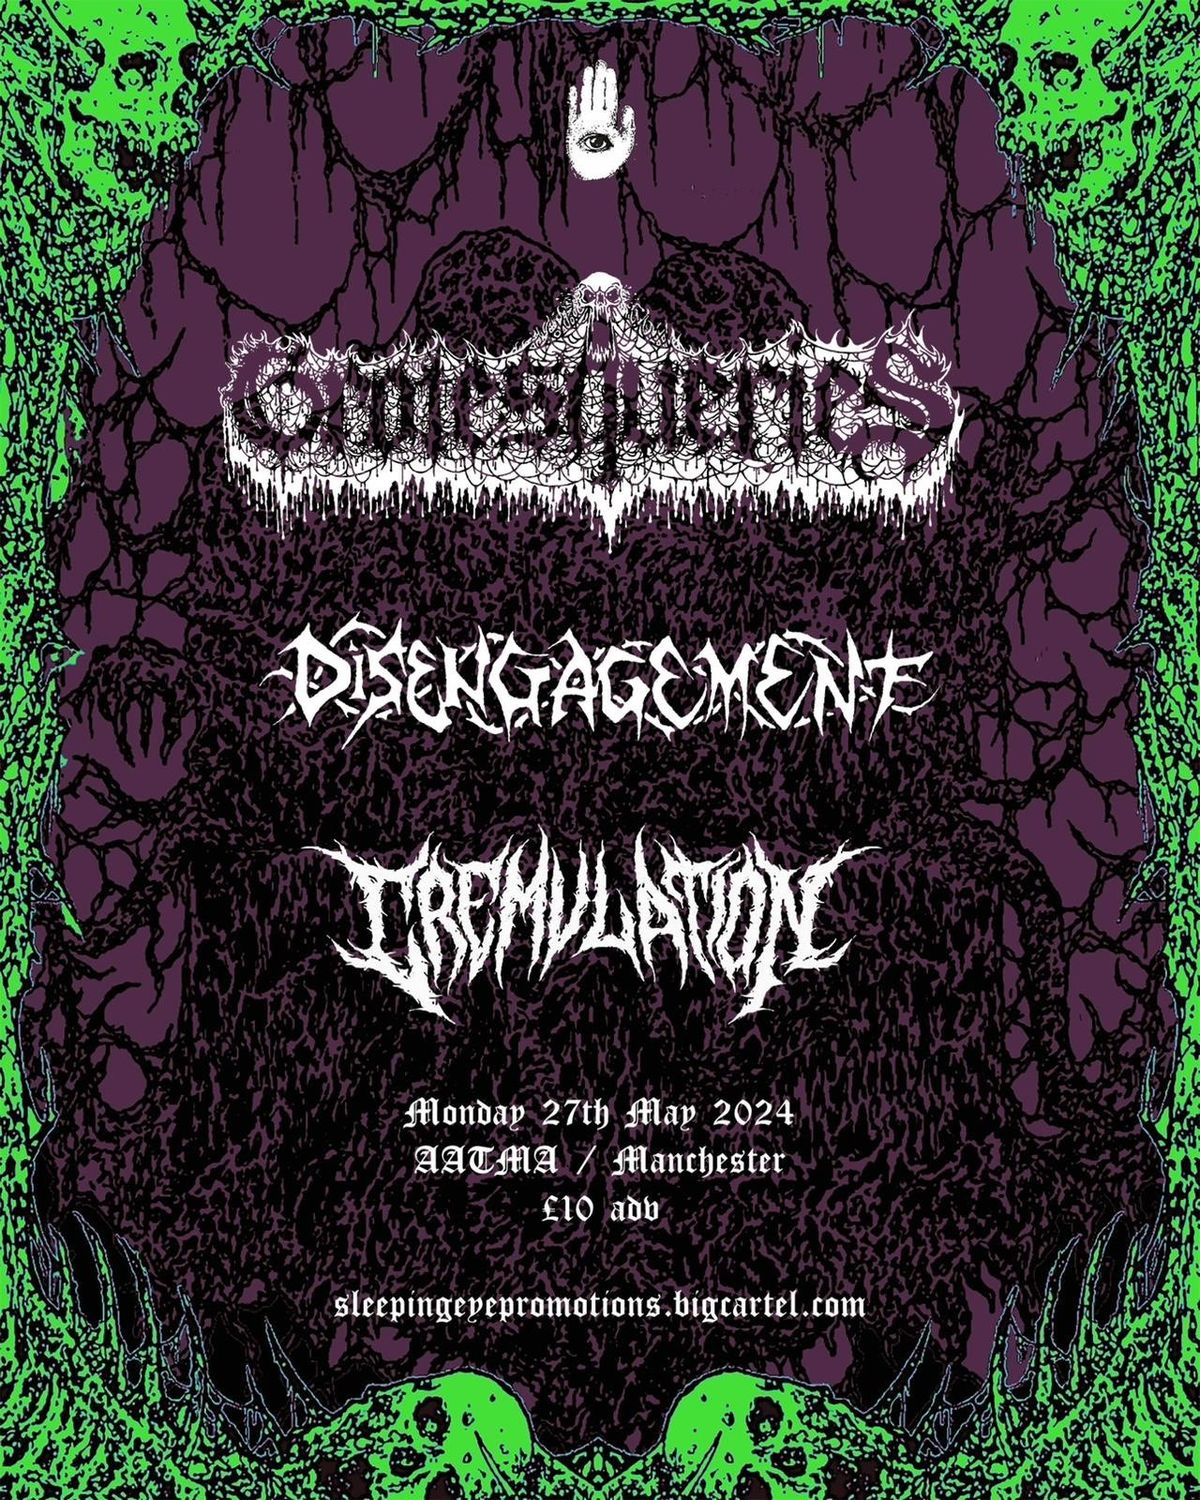 Sleeping Eye Presents: Grotesqueries (US), Disengagement and Cremulation